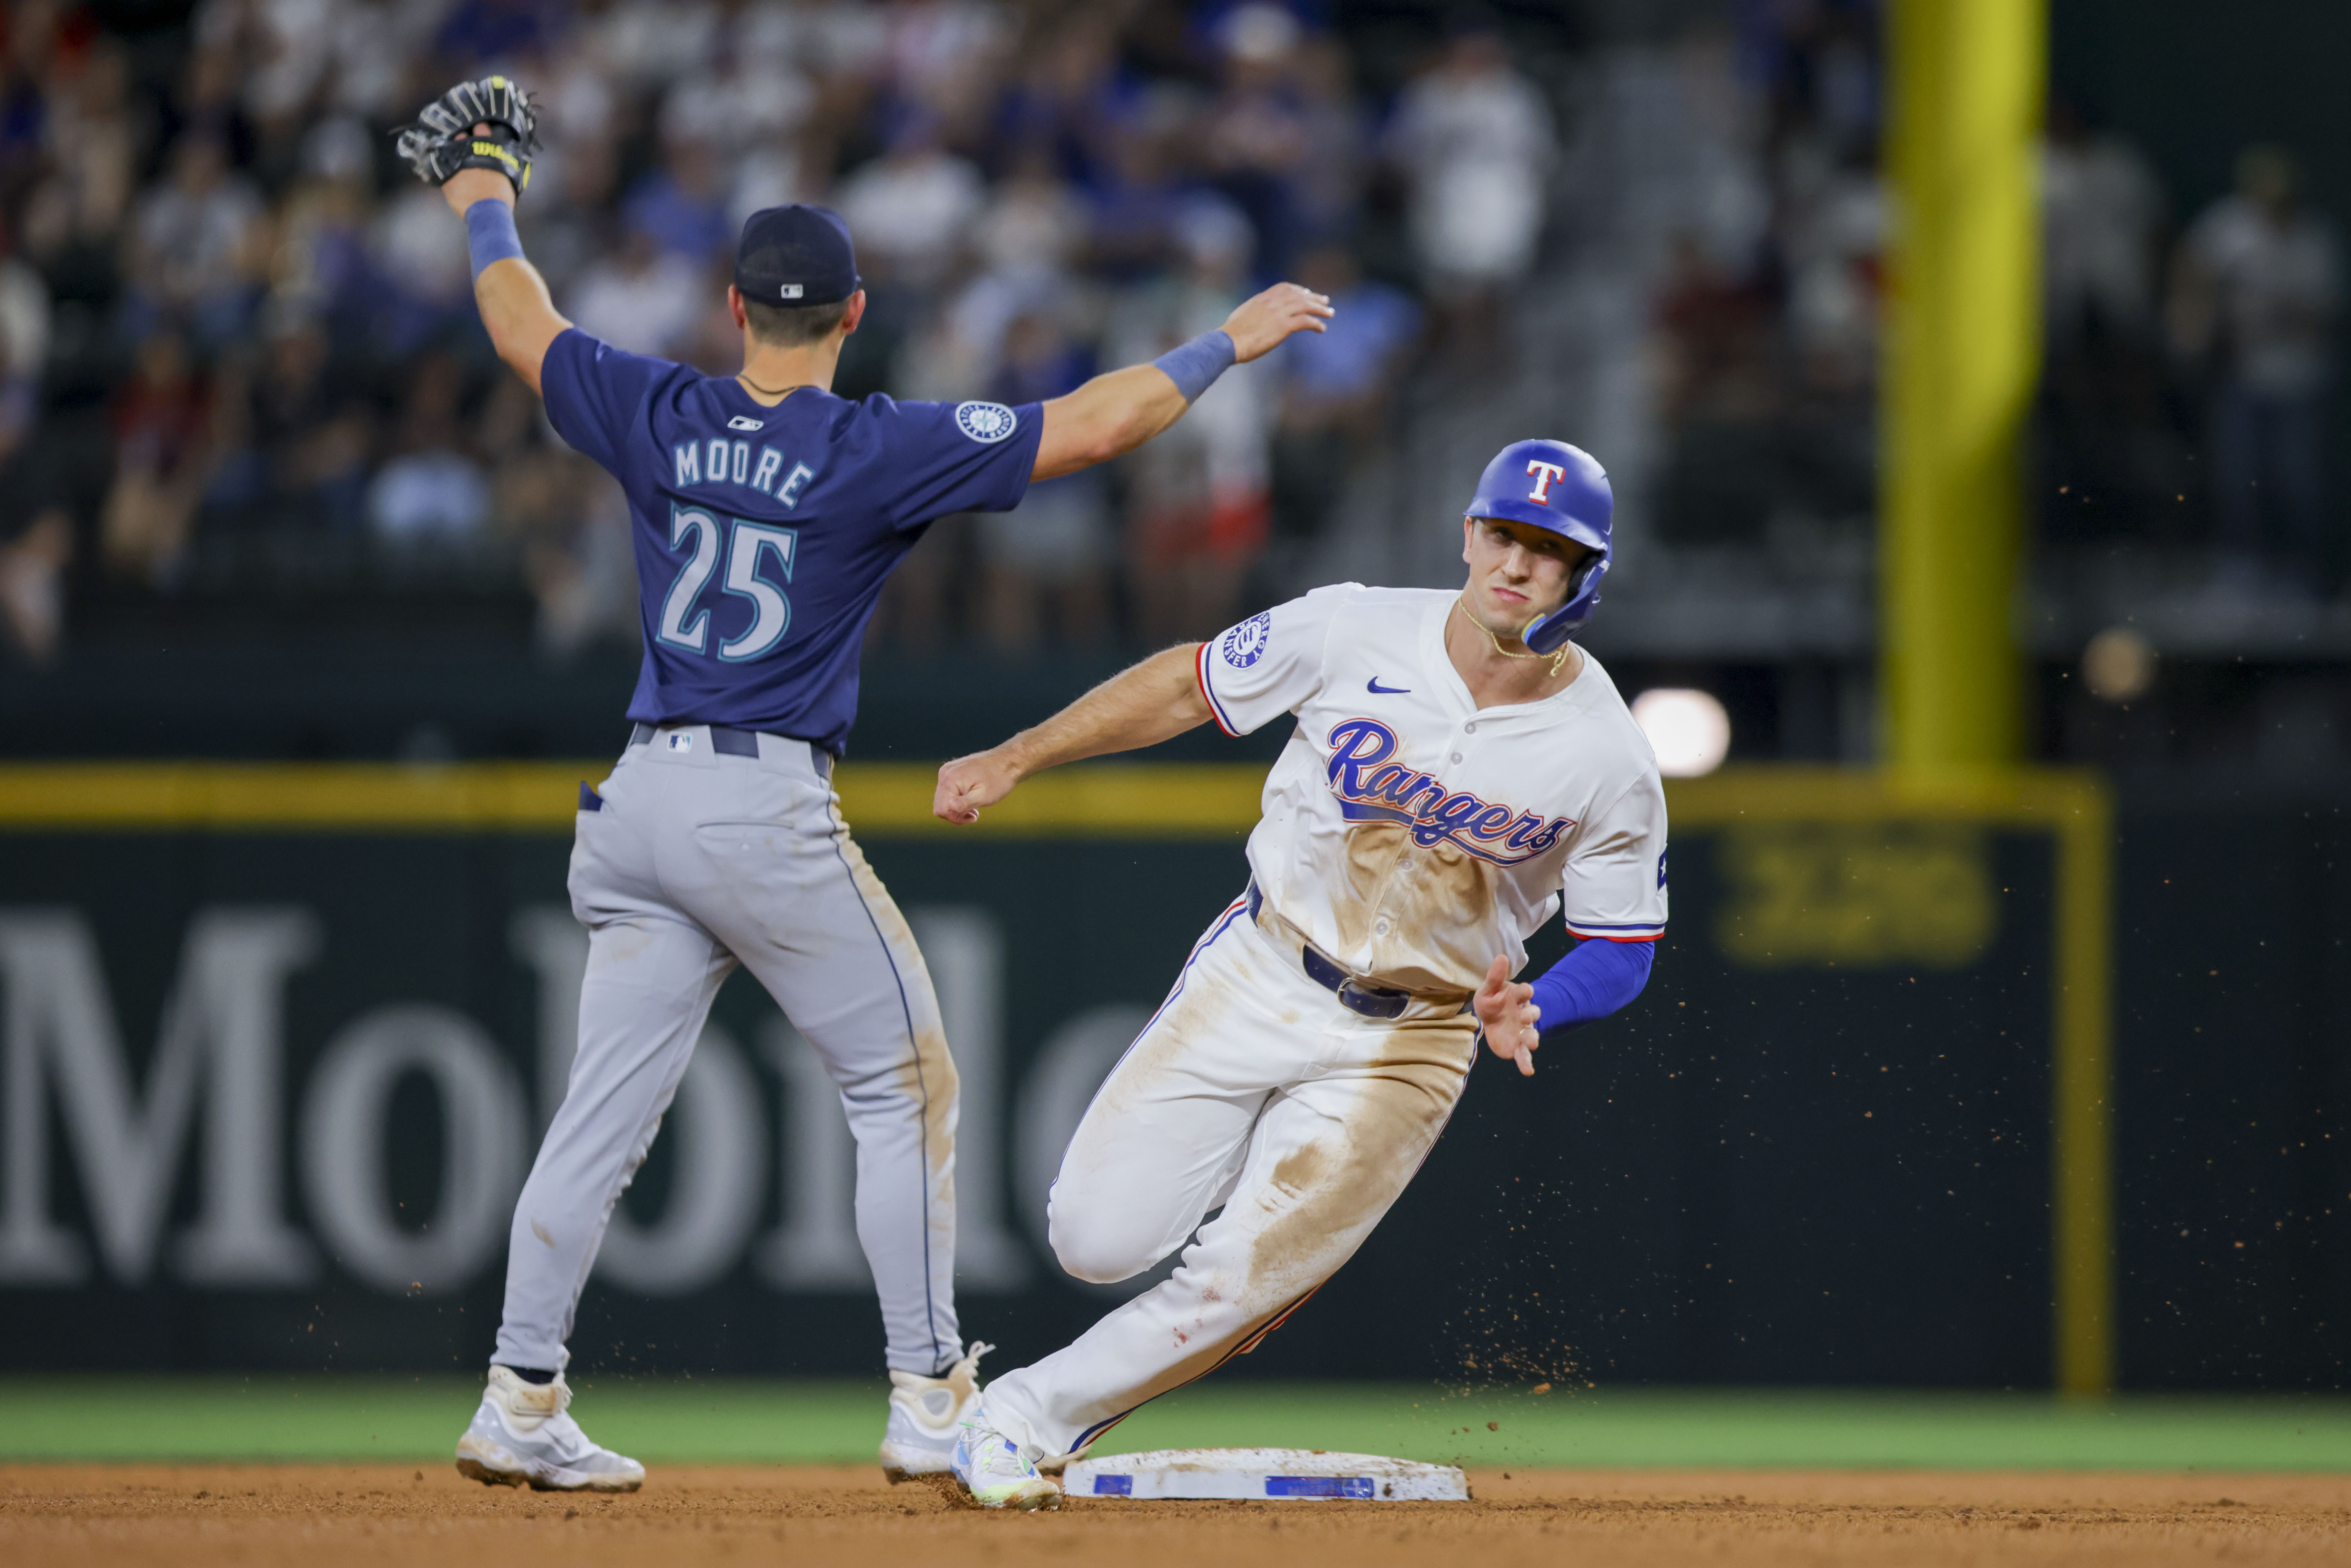 García and Carter hit back-to-back homers and Rangers beat Mariners